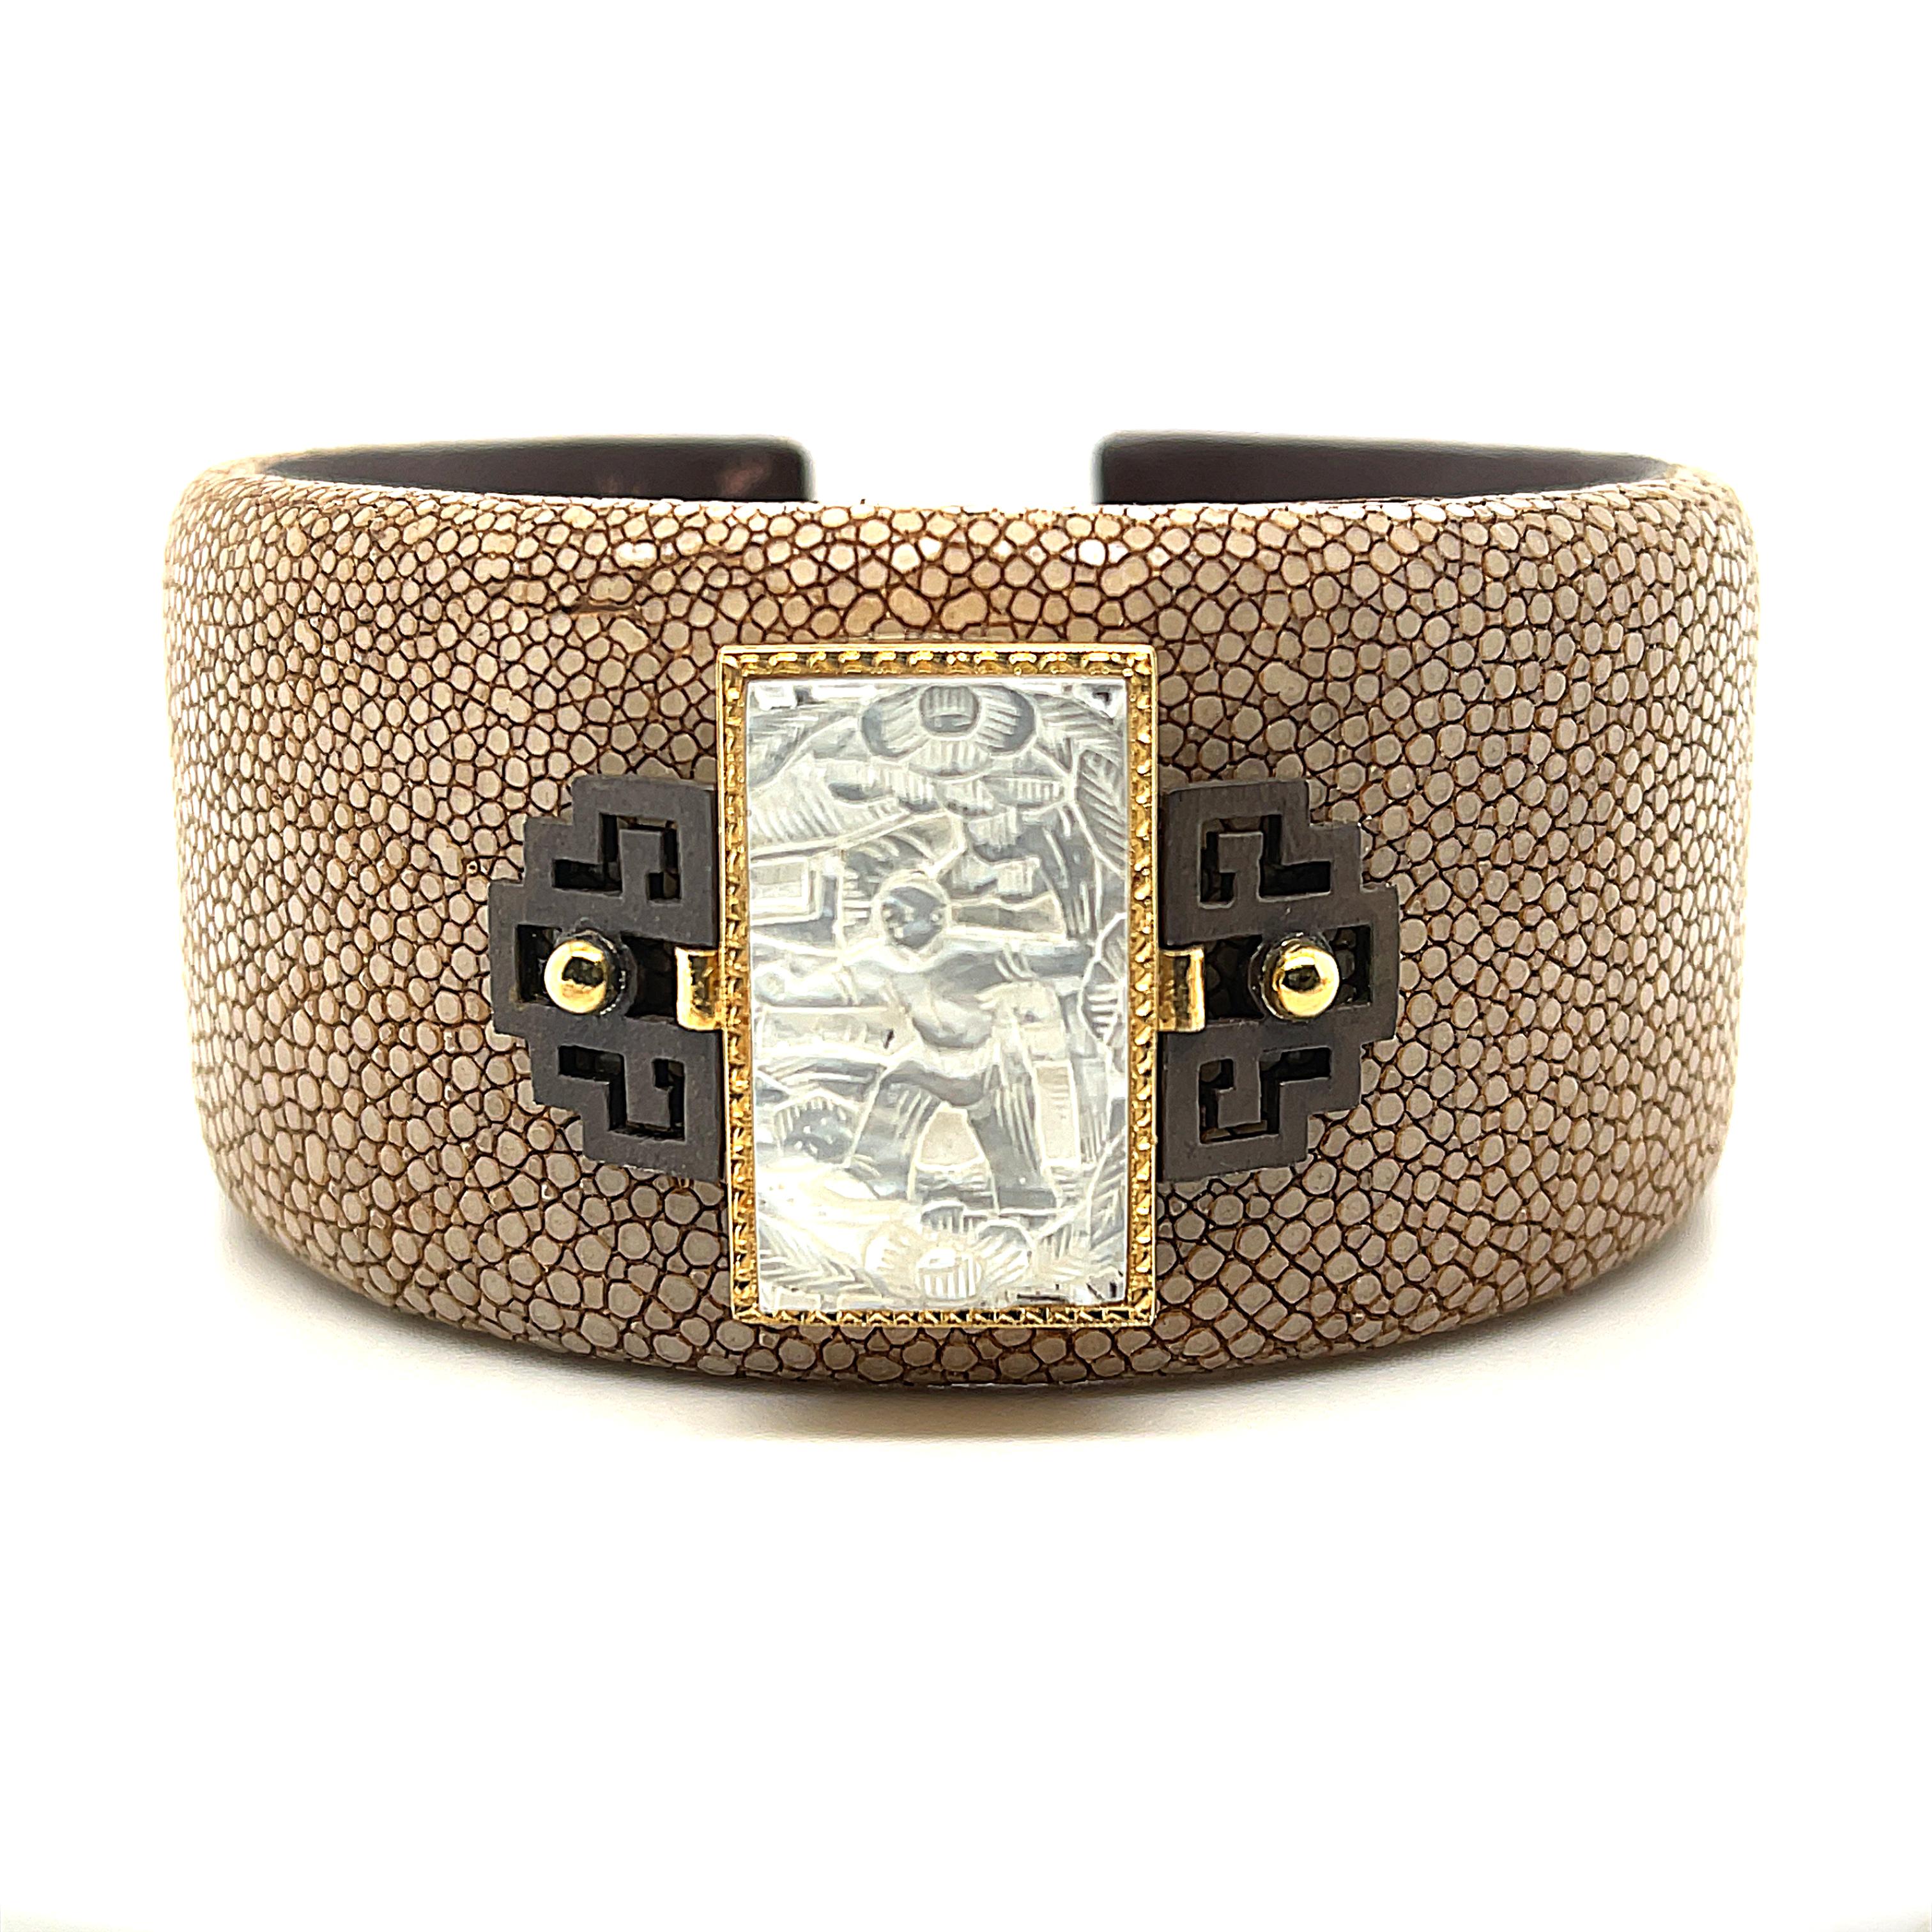 This 18k yellow gold shagreen cuff bracelet in taupe features an antique mother-of-pearl Chinese gambling counter with motifs dating back to the 18th Century. Originally carved in China for export to Britain, these counters were used much like we